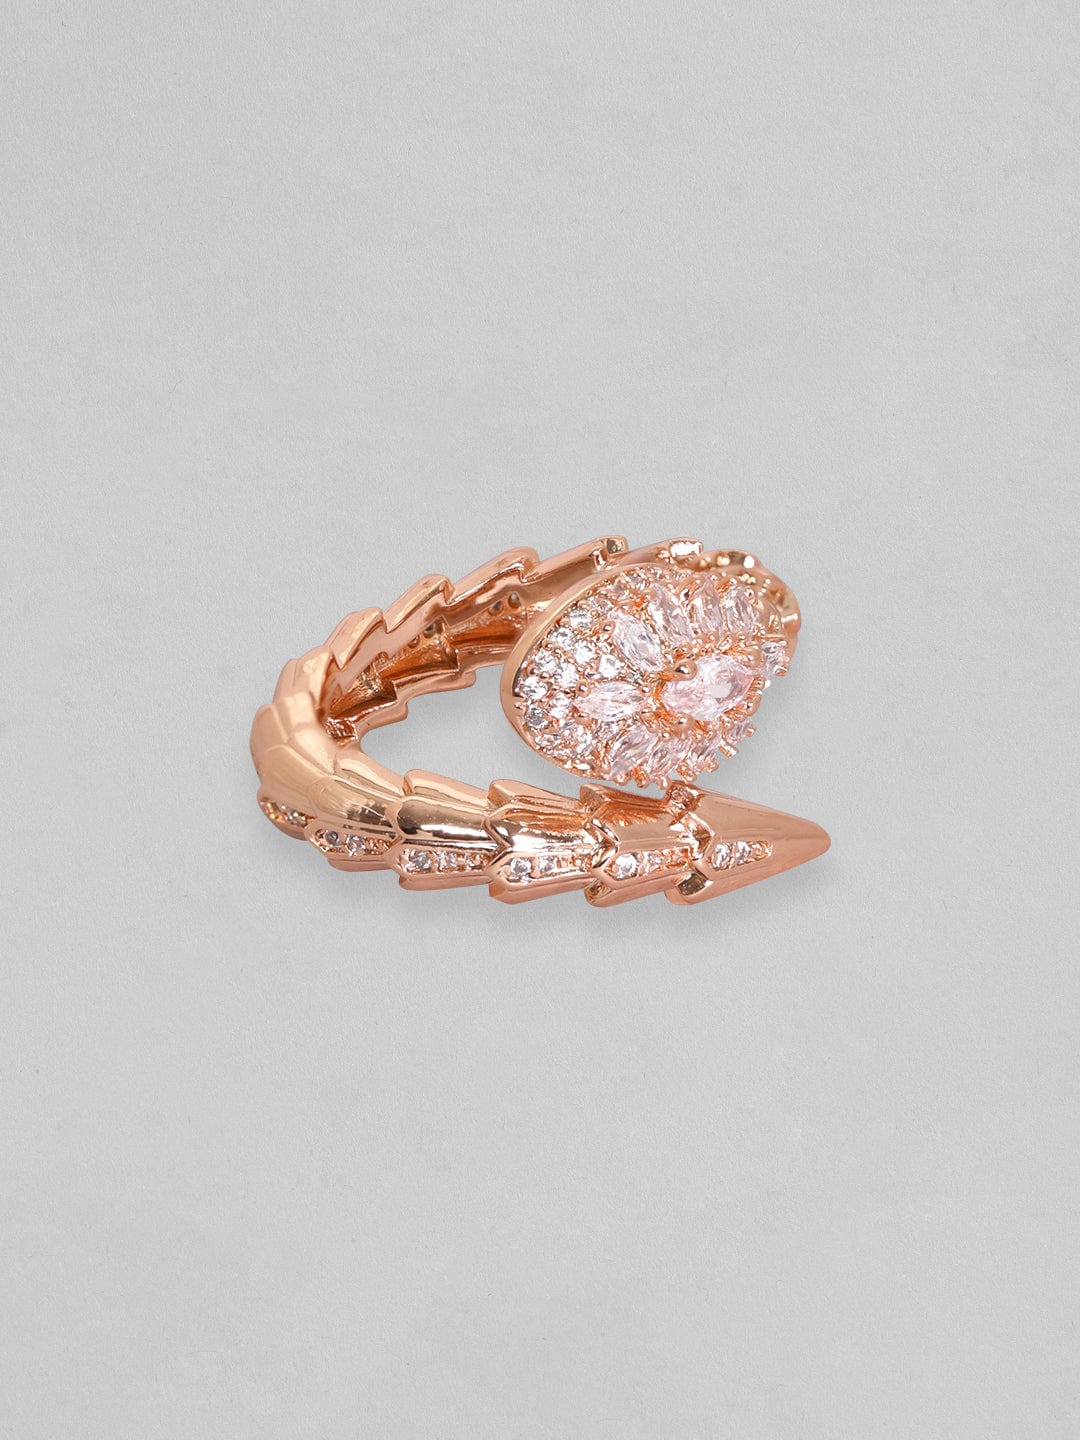 Rubans Voguish 18K Rose Gold Serpent Textured marquise Zirconia Studded Wrap Ring Rings